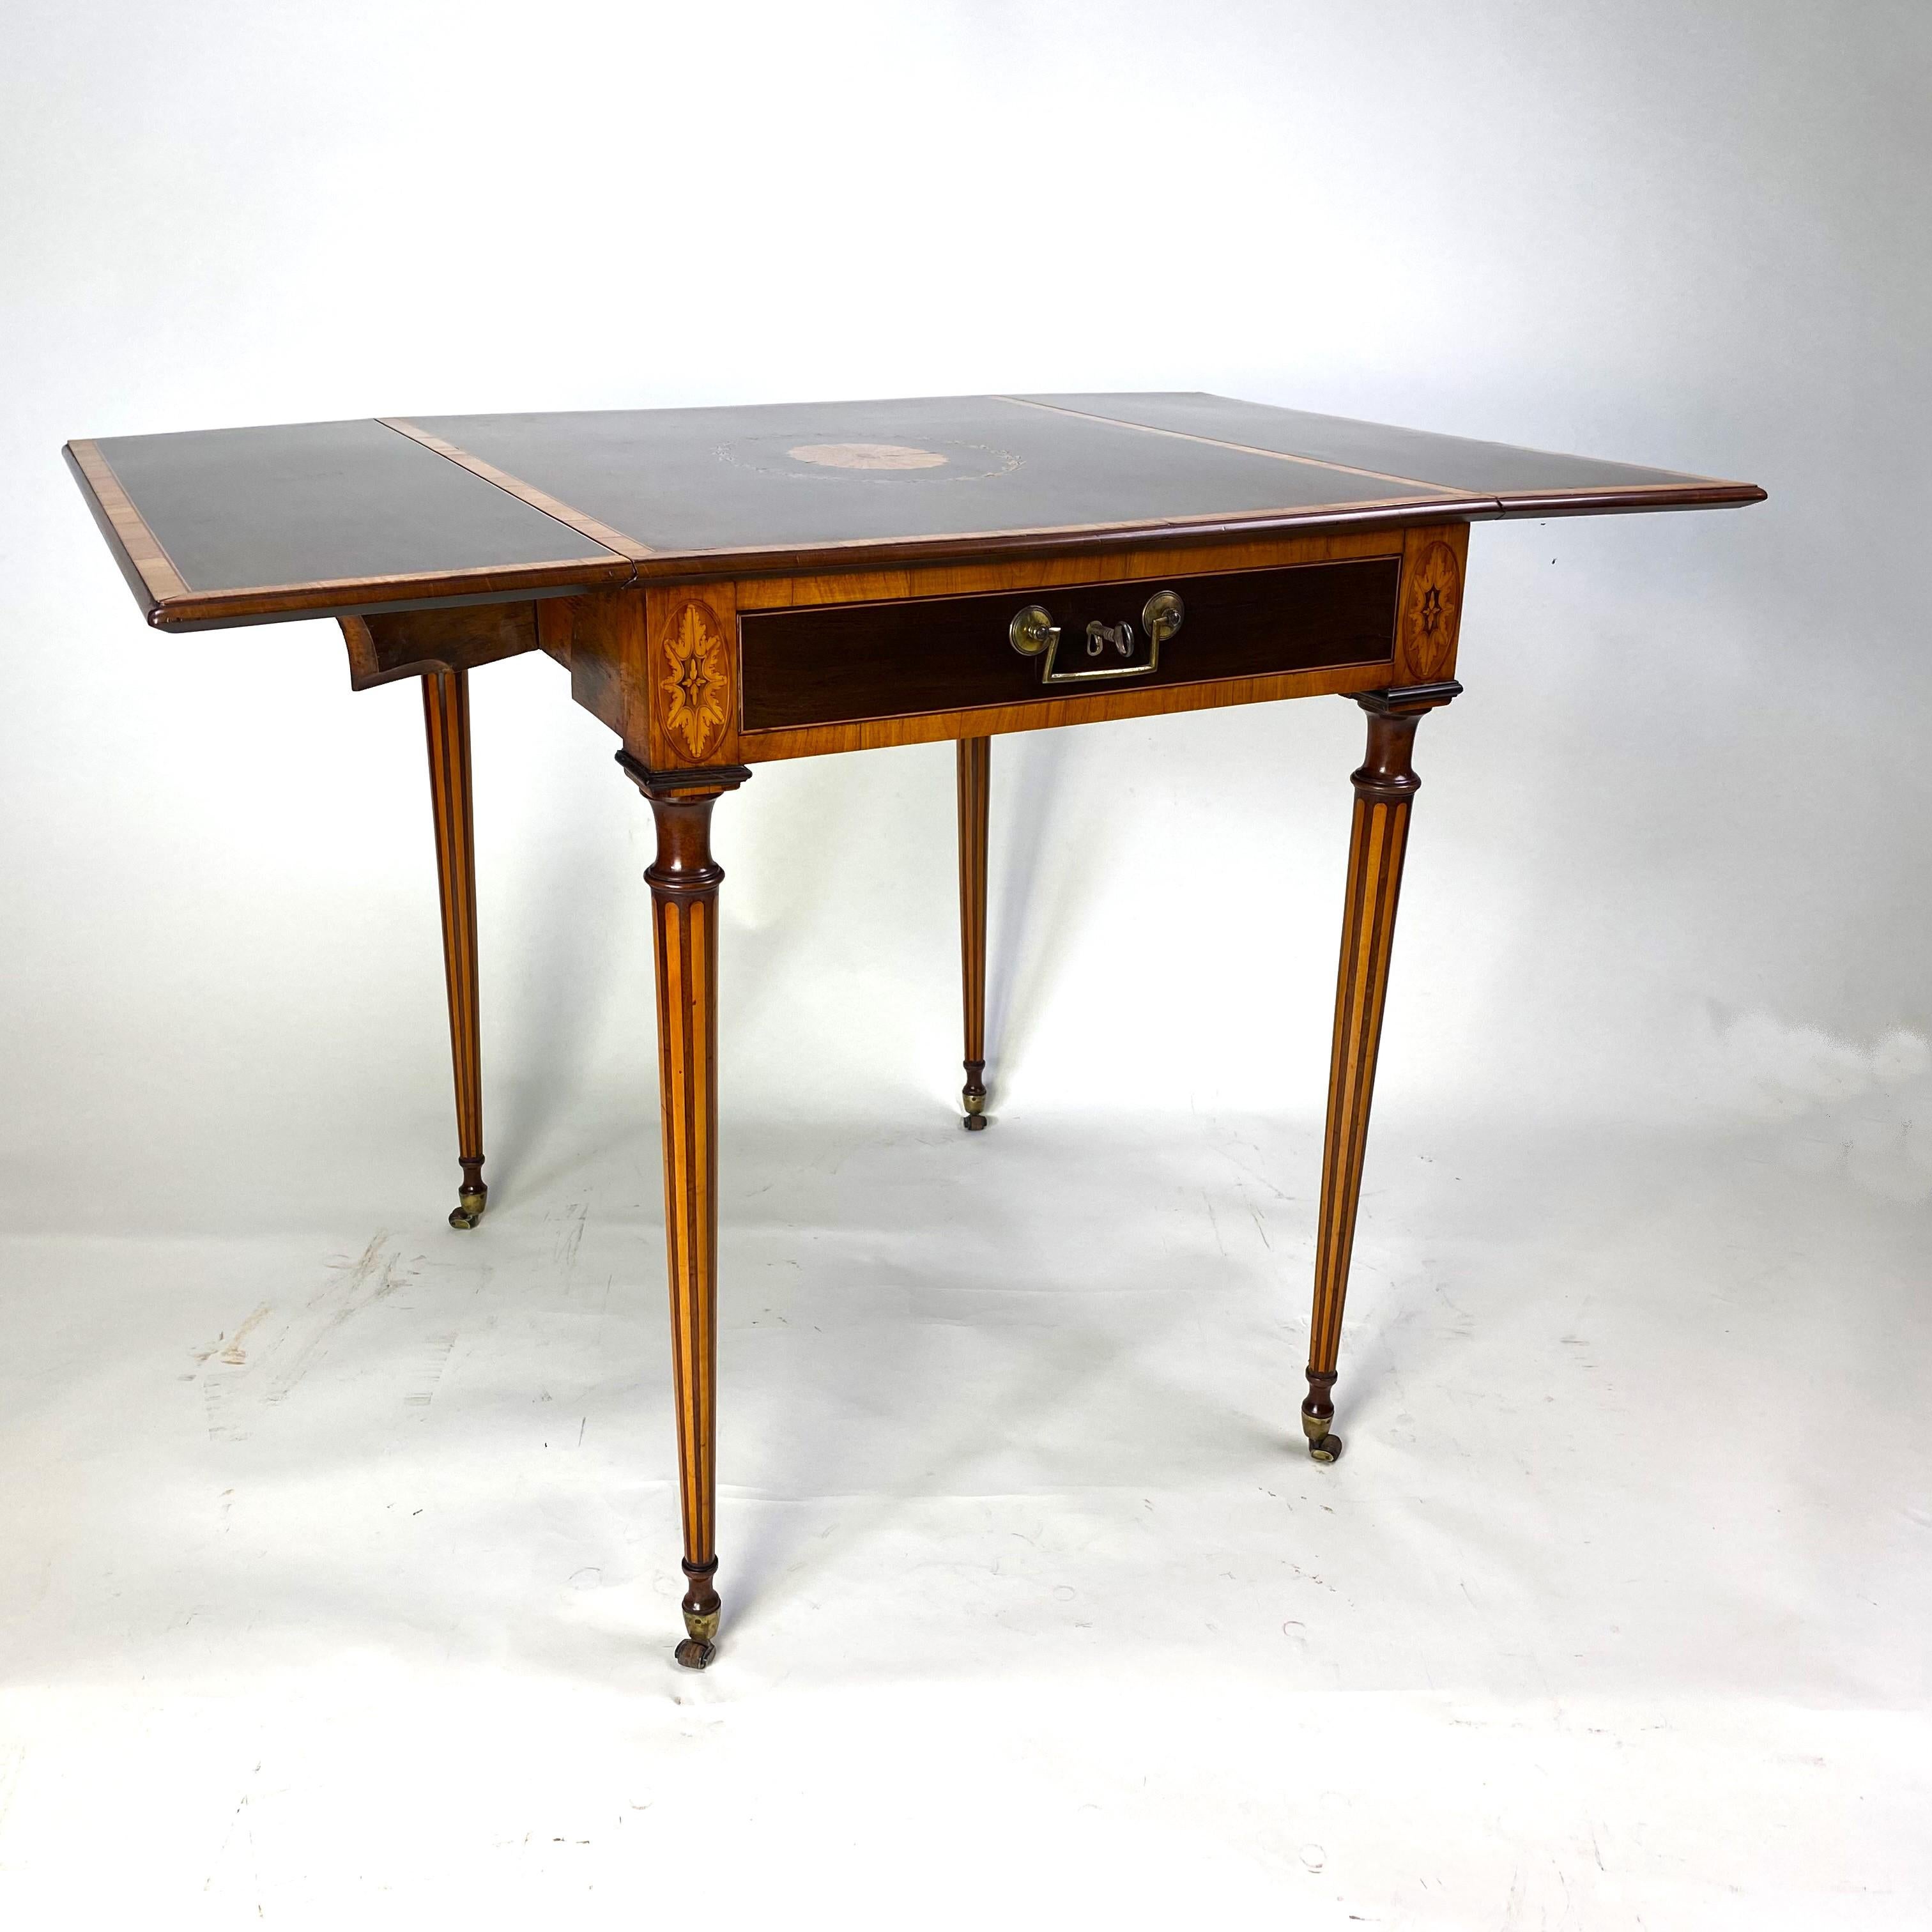 English Pembroke table attributed to Ince and Mayhew For Sale